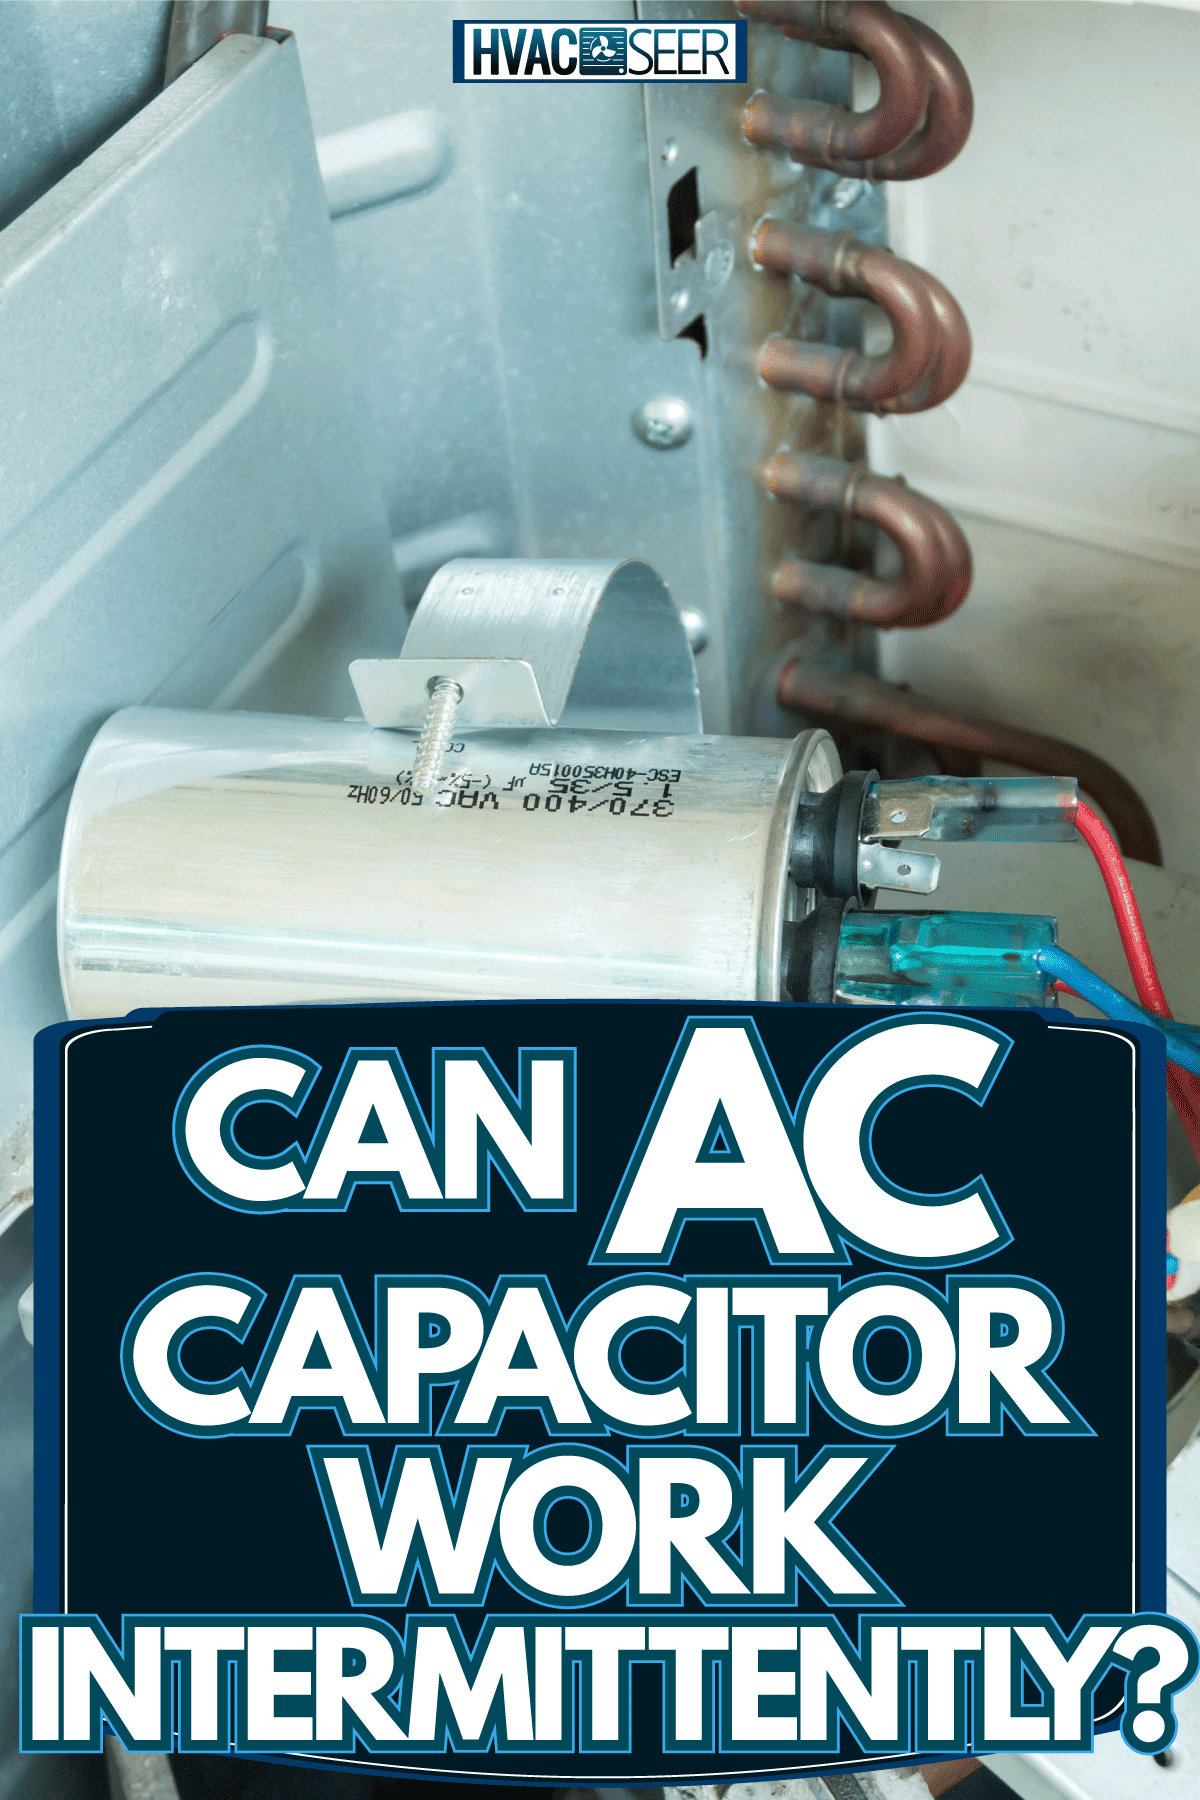 A newly replaced capacitor for an air conditioning unit, Can AC Capacitor Work Intermittently?